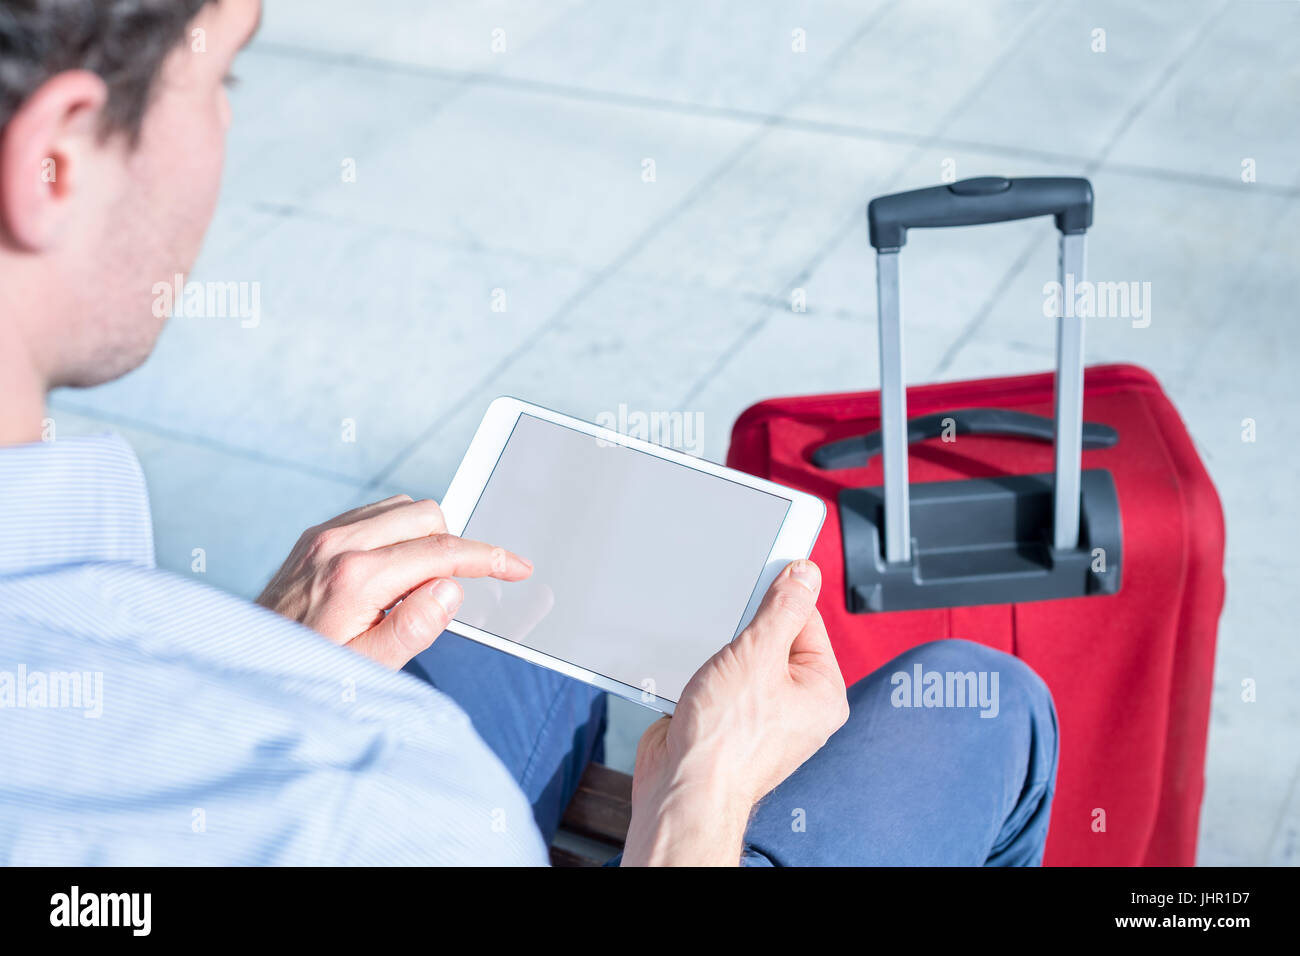 Person using a digital tablet computer with internet at airport and showing blank screen, business travel Stock Photo